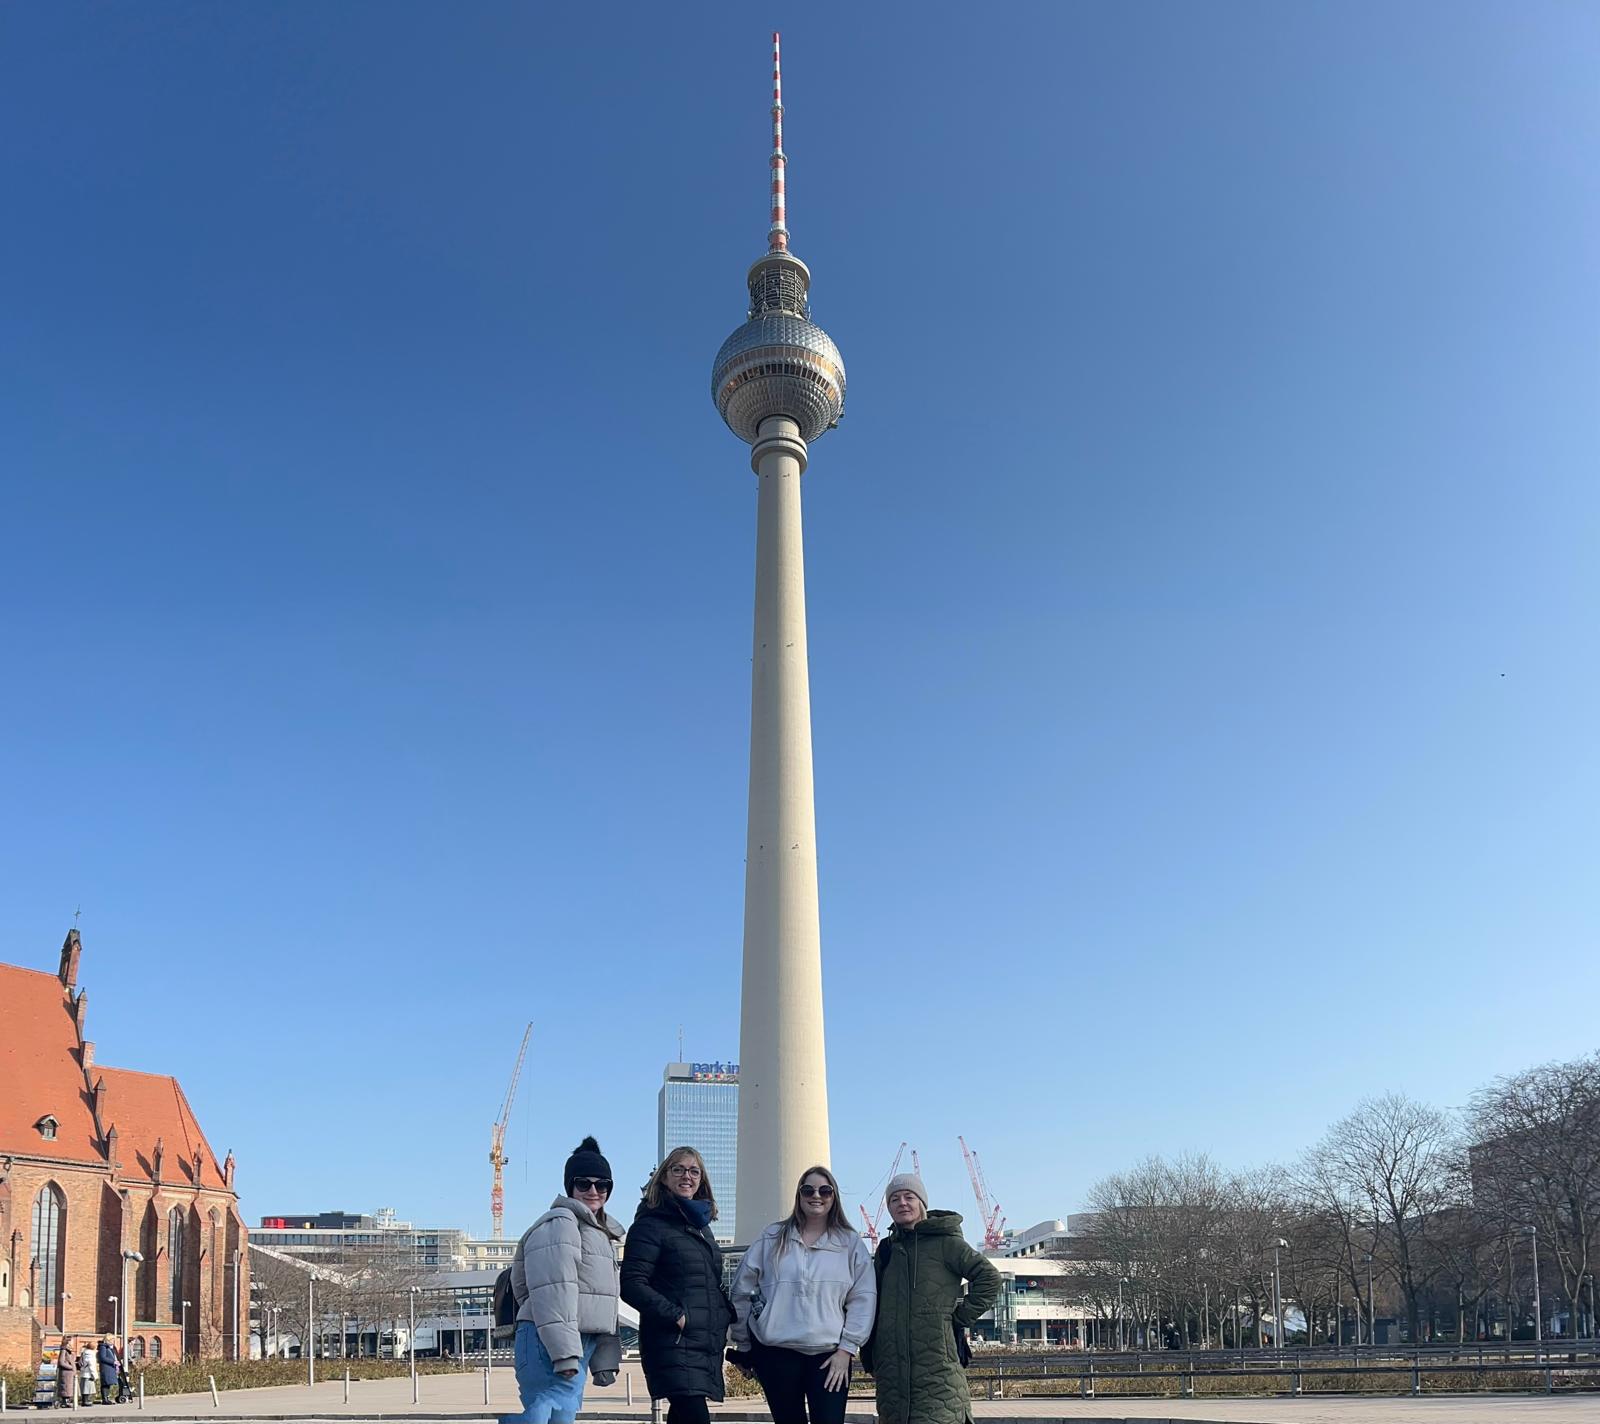 Students in Berlin at the TV Tower